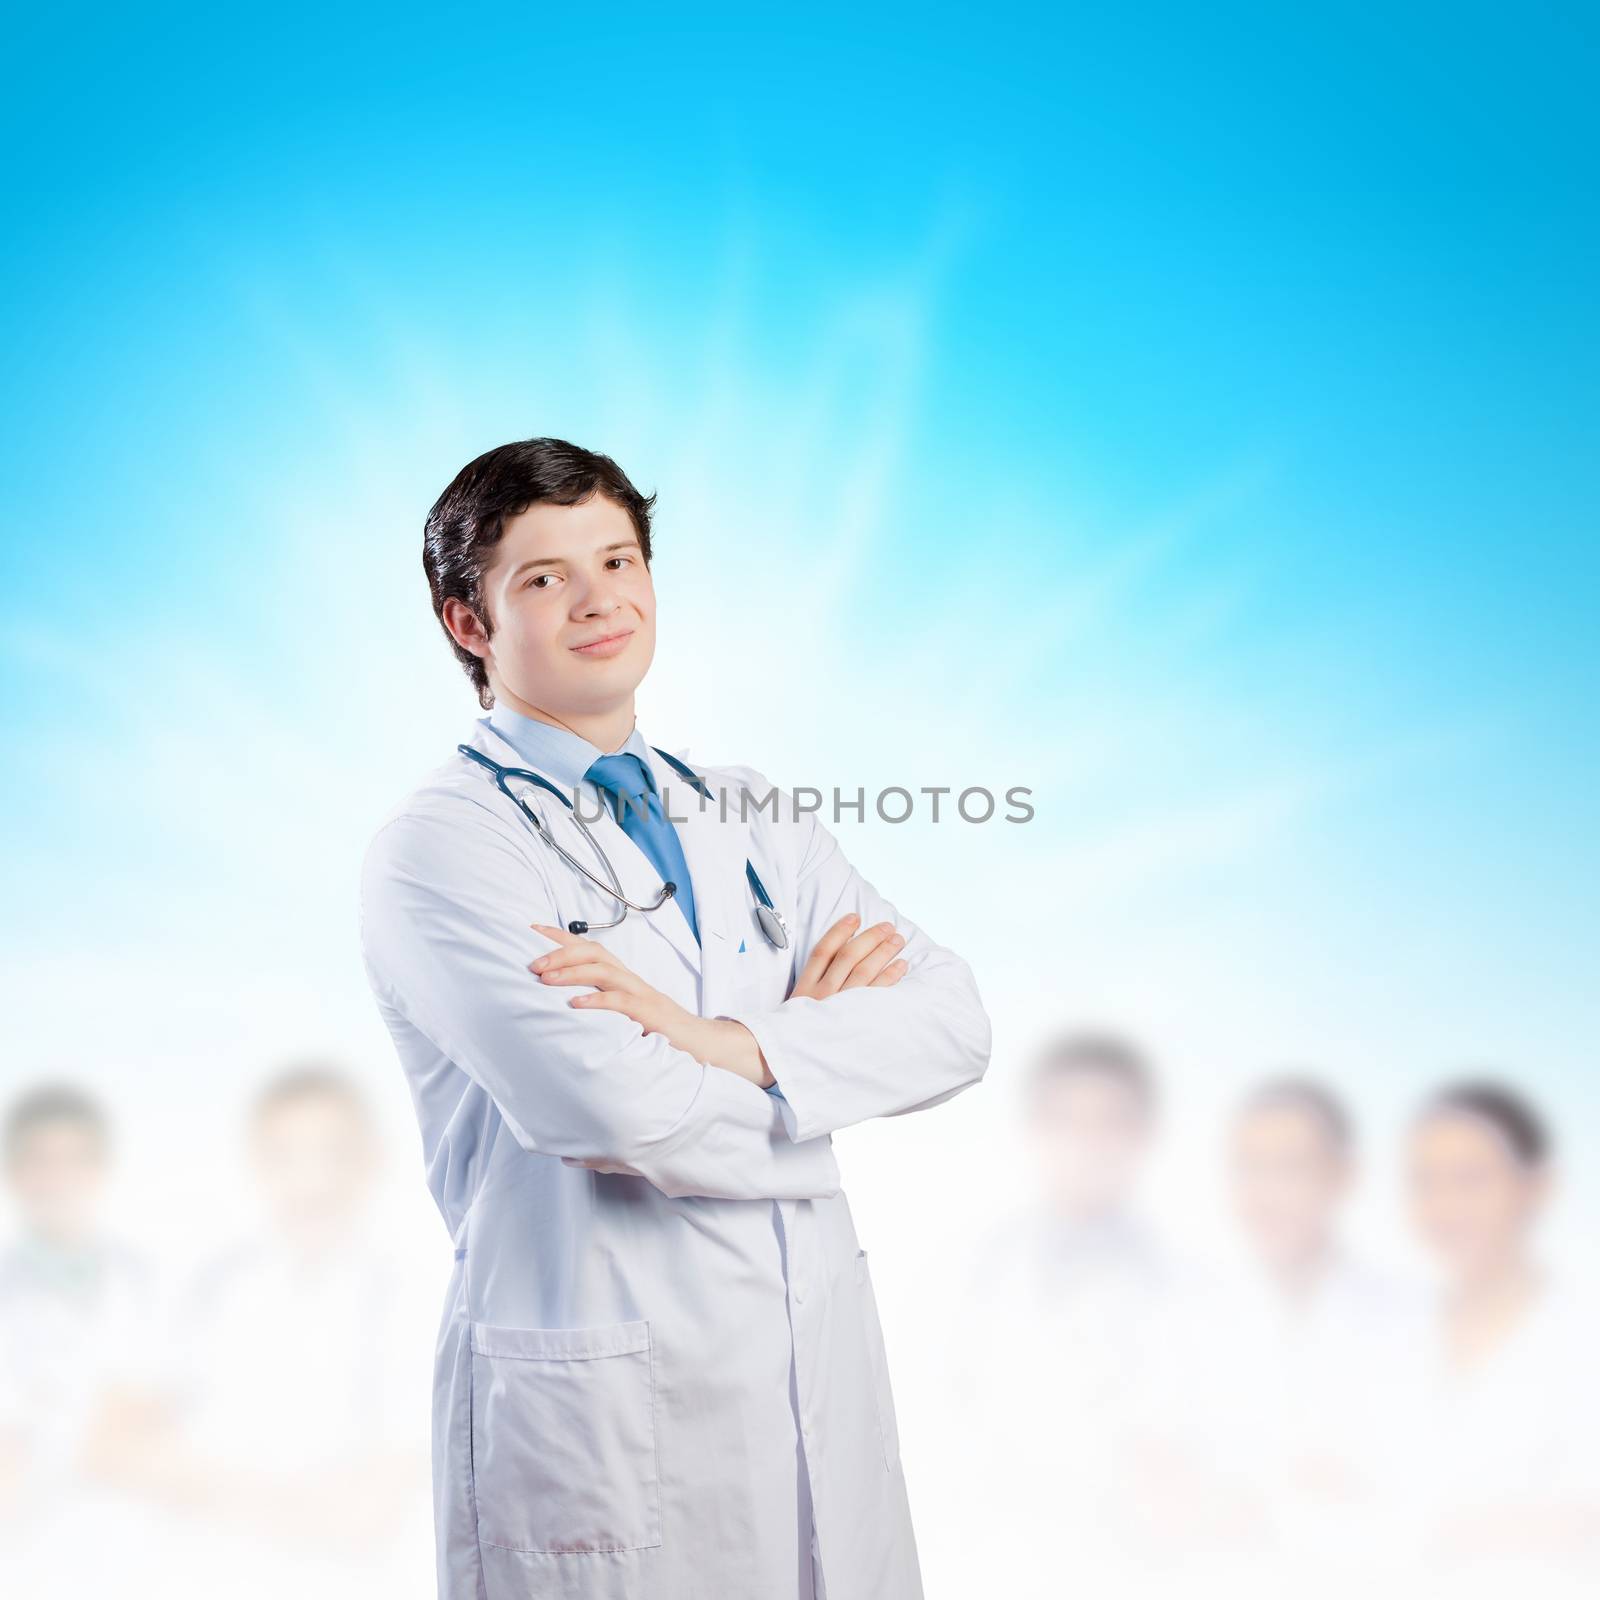 Image of happy confident doctor in uniform with colleagues at background